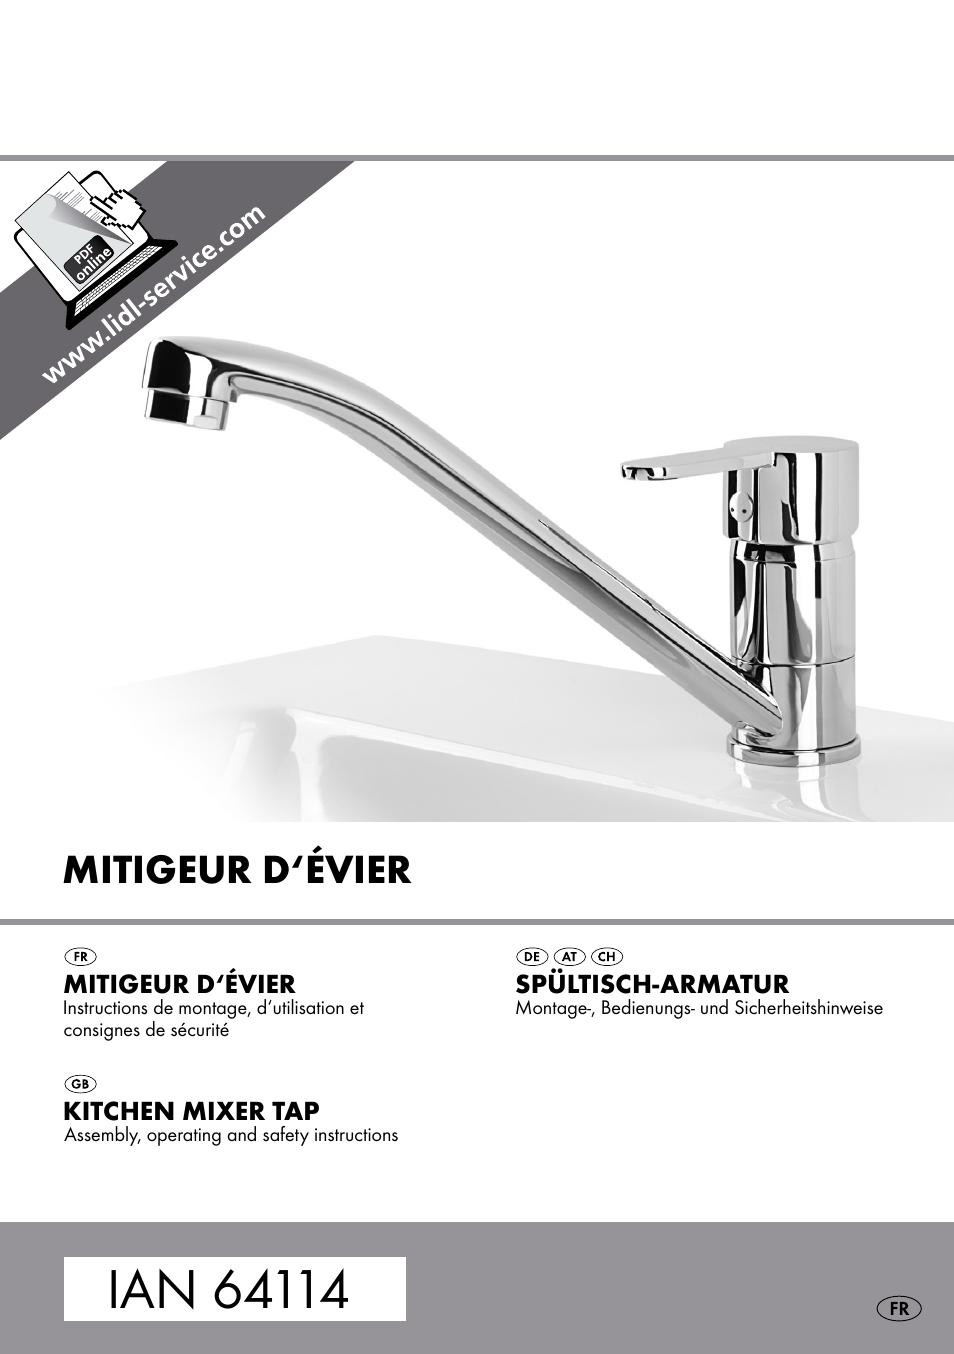 Miomare Sink Mixer Tap / Kitchen Mixer Tap User Manual | 25 pages